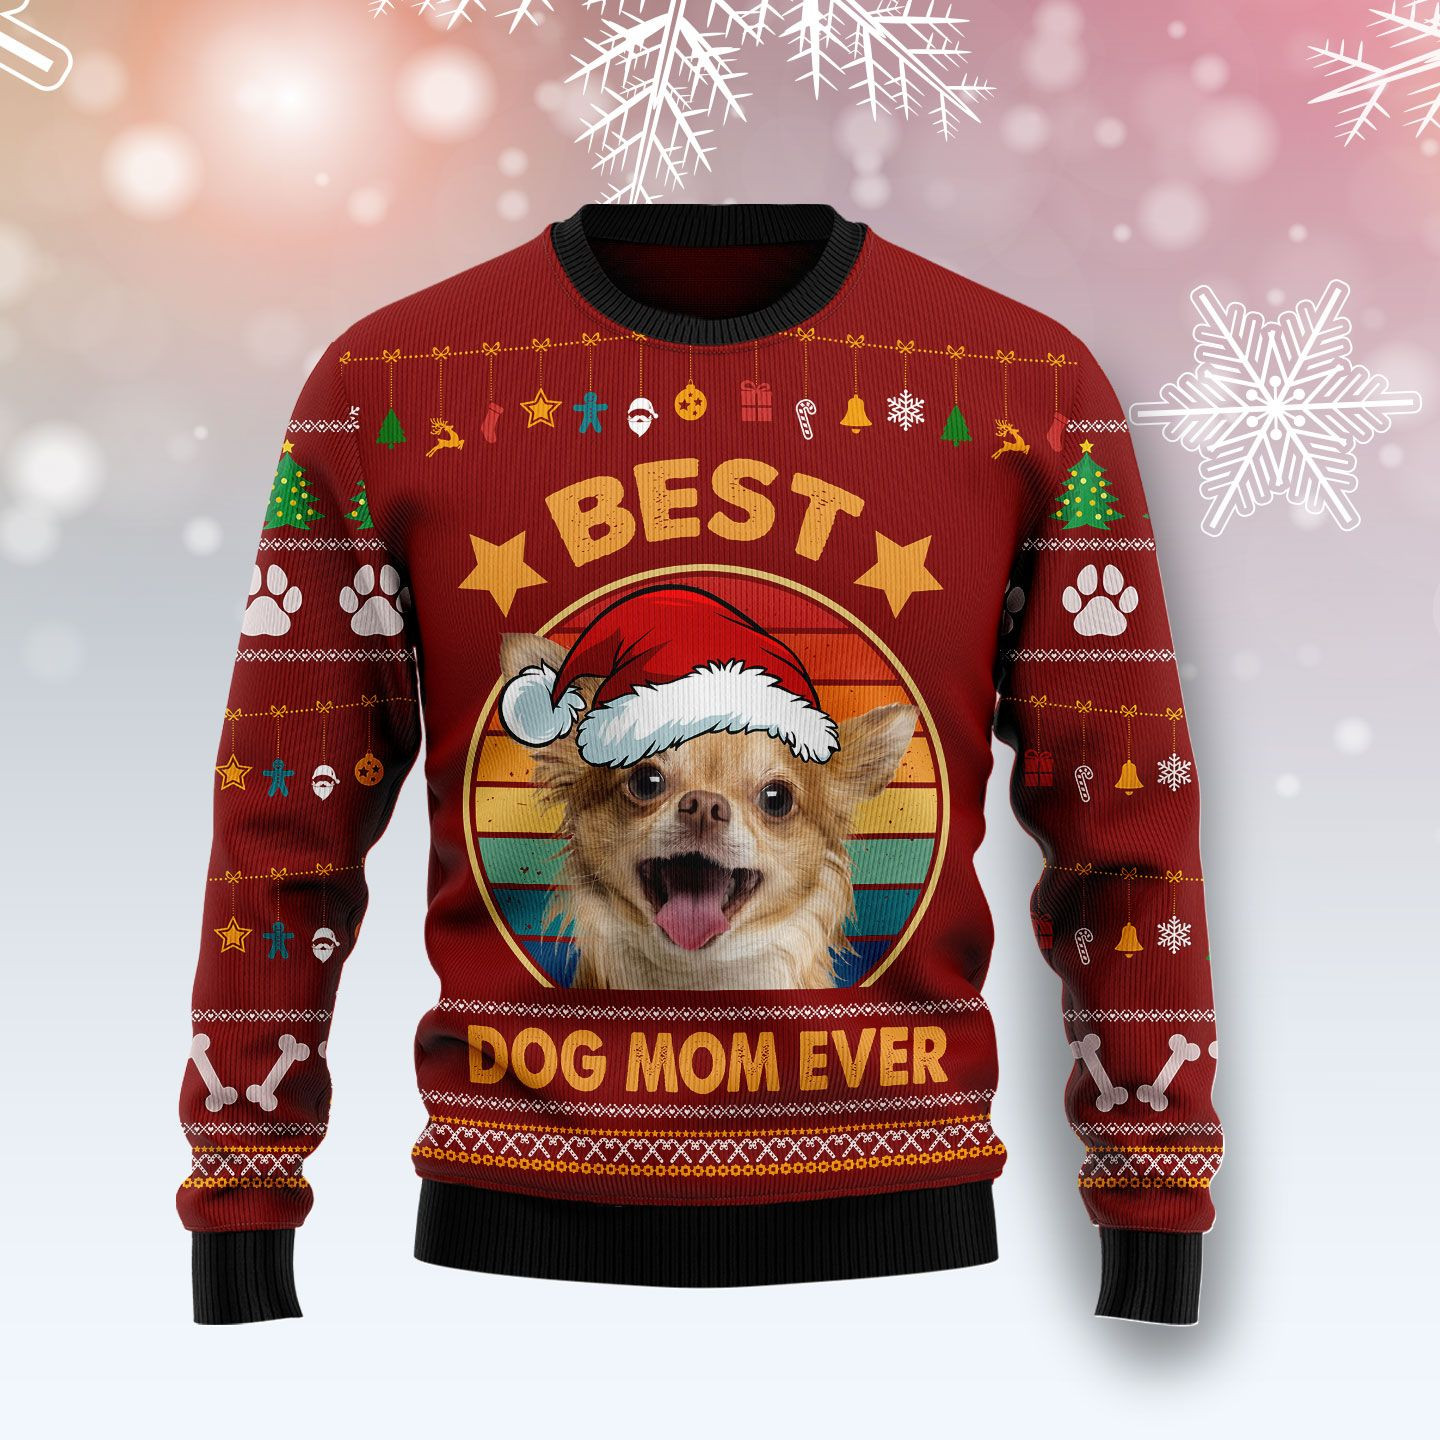 Chihuahua Best Dog Mom Ever Ugly Christmas Sweater, Ugly Sweater For Men Women, Holiday Sweater